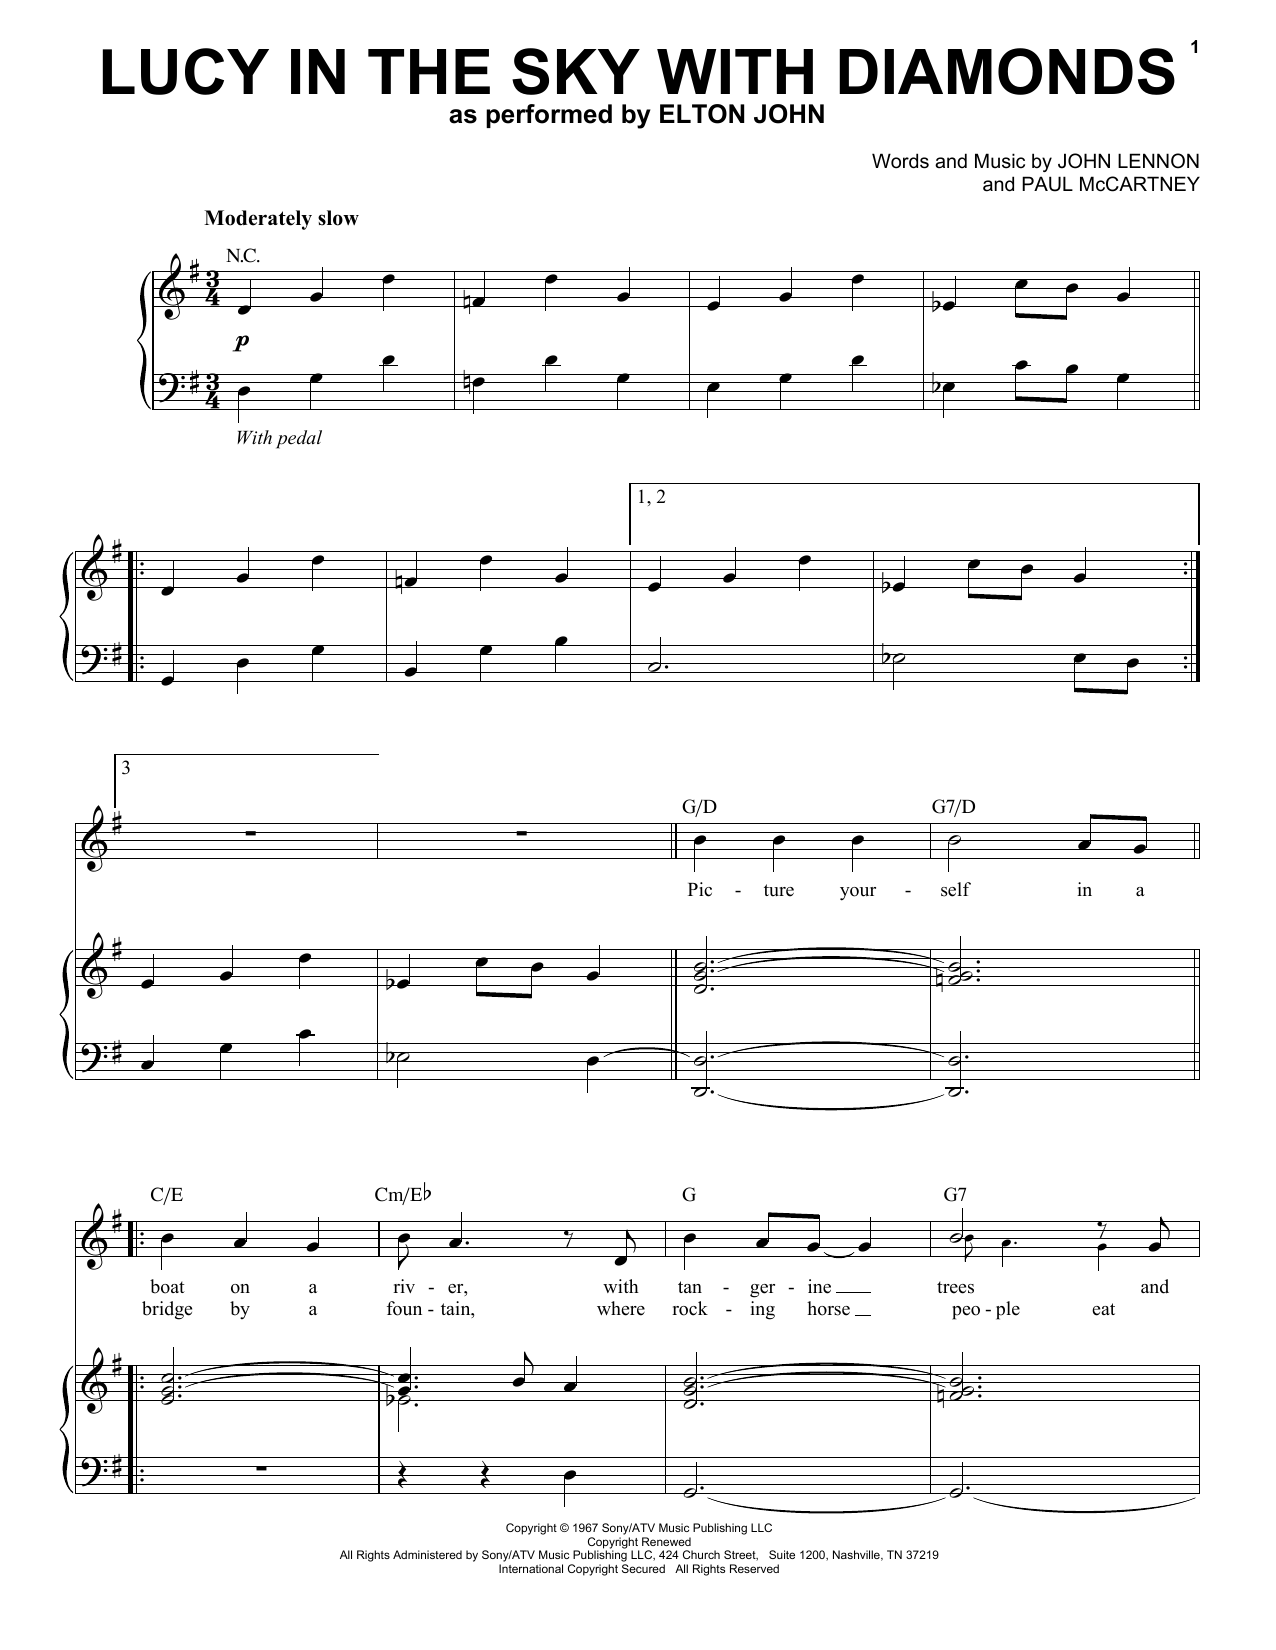 Download Elton John Lucy In The Sky With Diamonds Sheet Music